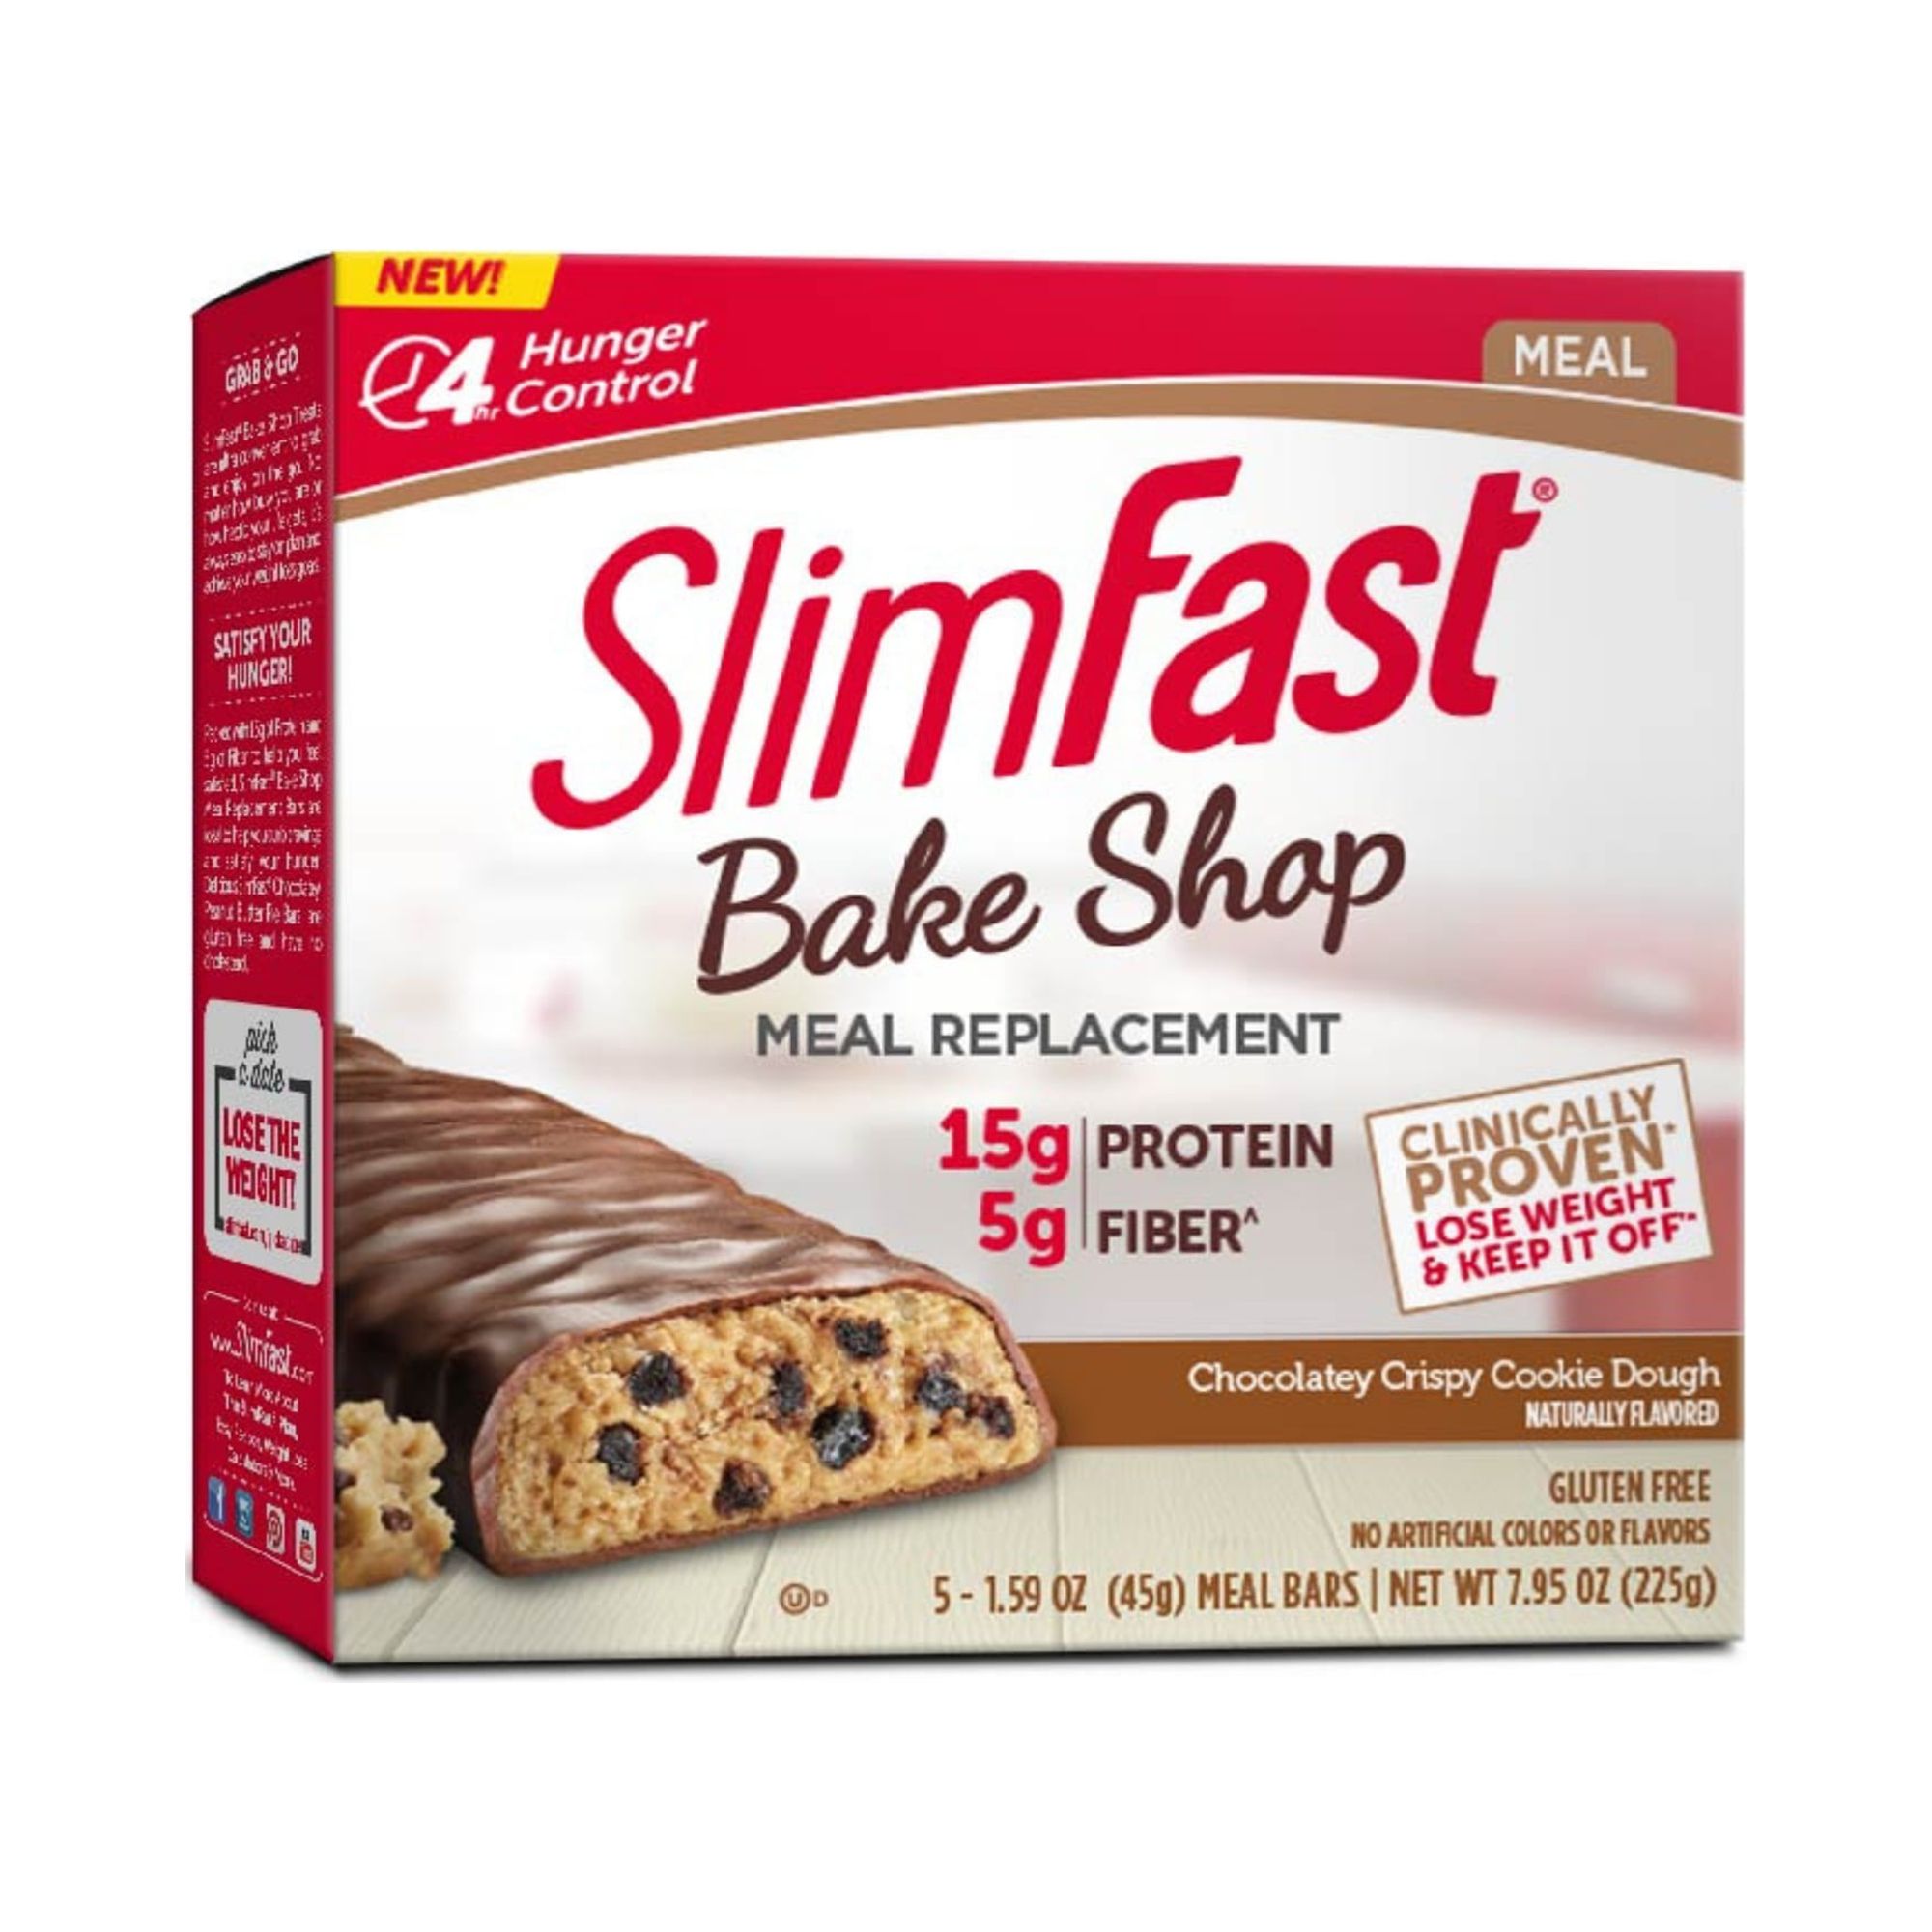 SlimFast Bake Shop Chocolatey Crispy Cookie Dough Meal Replacement Bar, 1.59 Oz, 5 Count - image 1 of 6